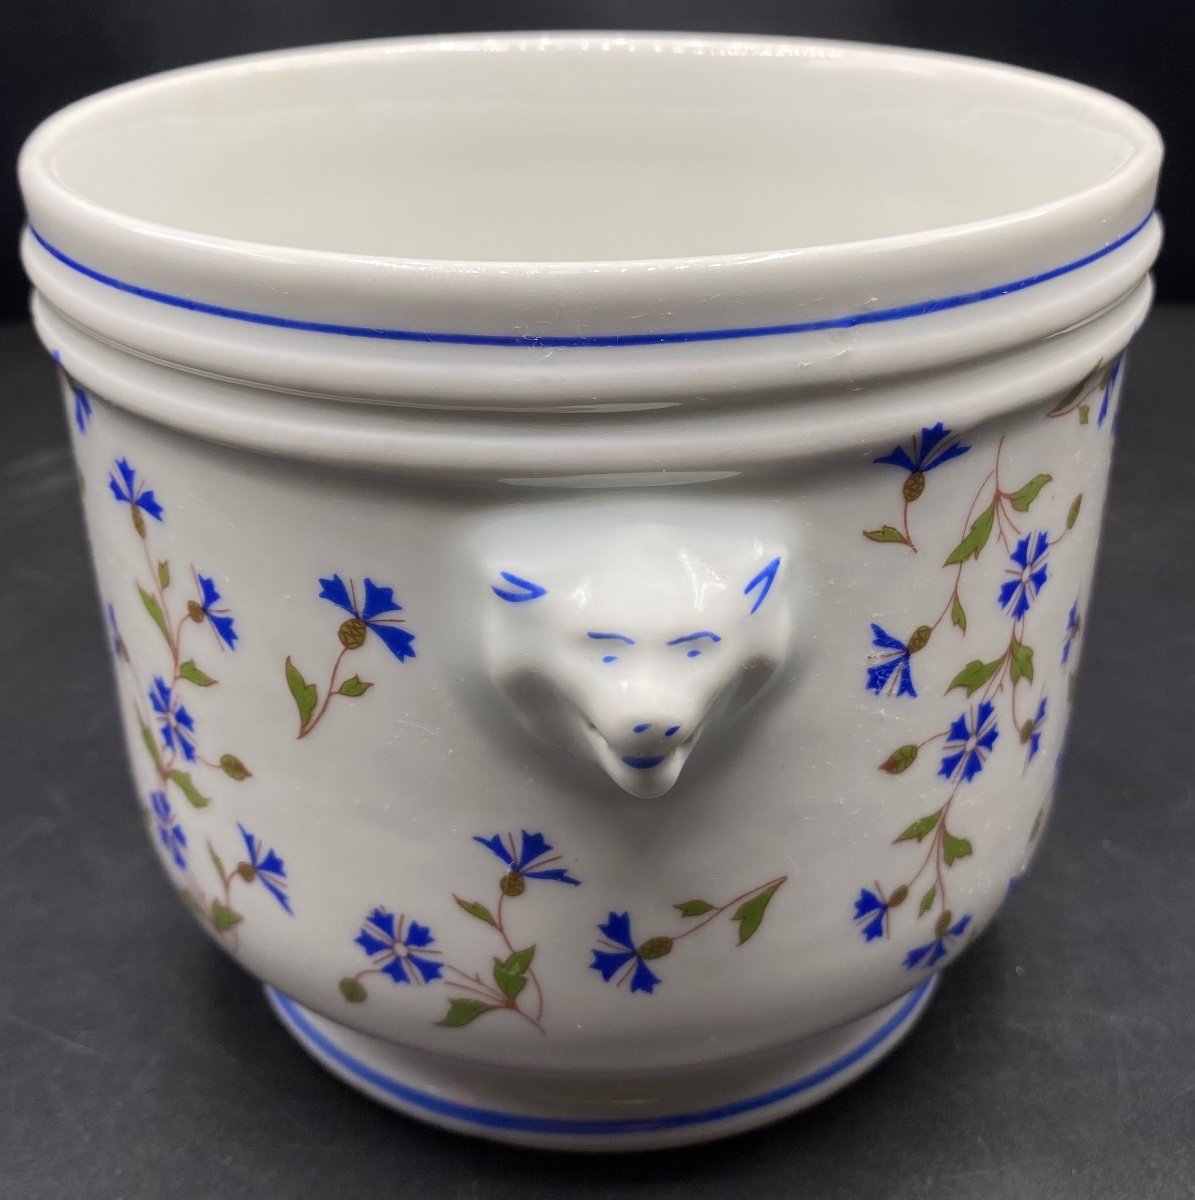 Enamelled Porcelain Planter With Barbots From The 1930s/40s-photo-4